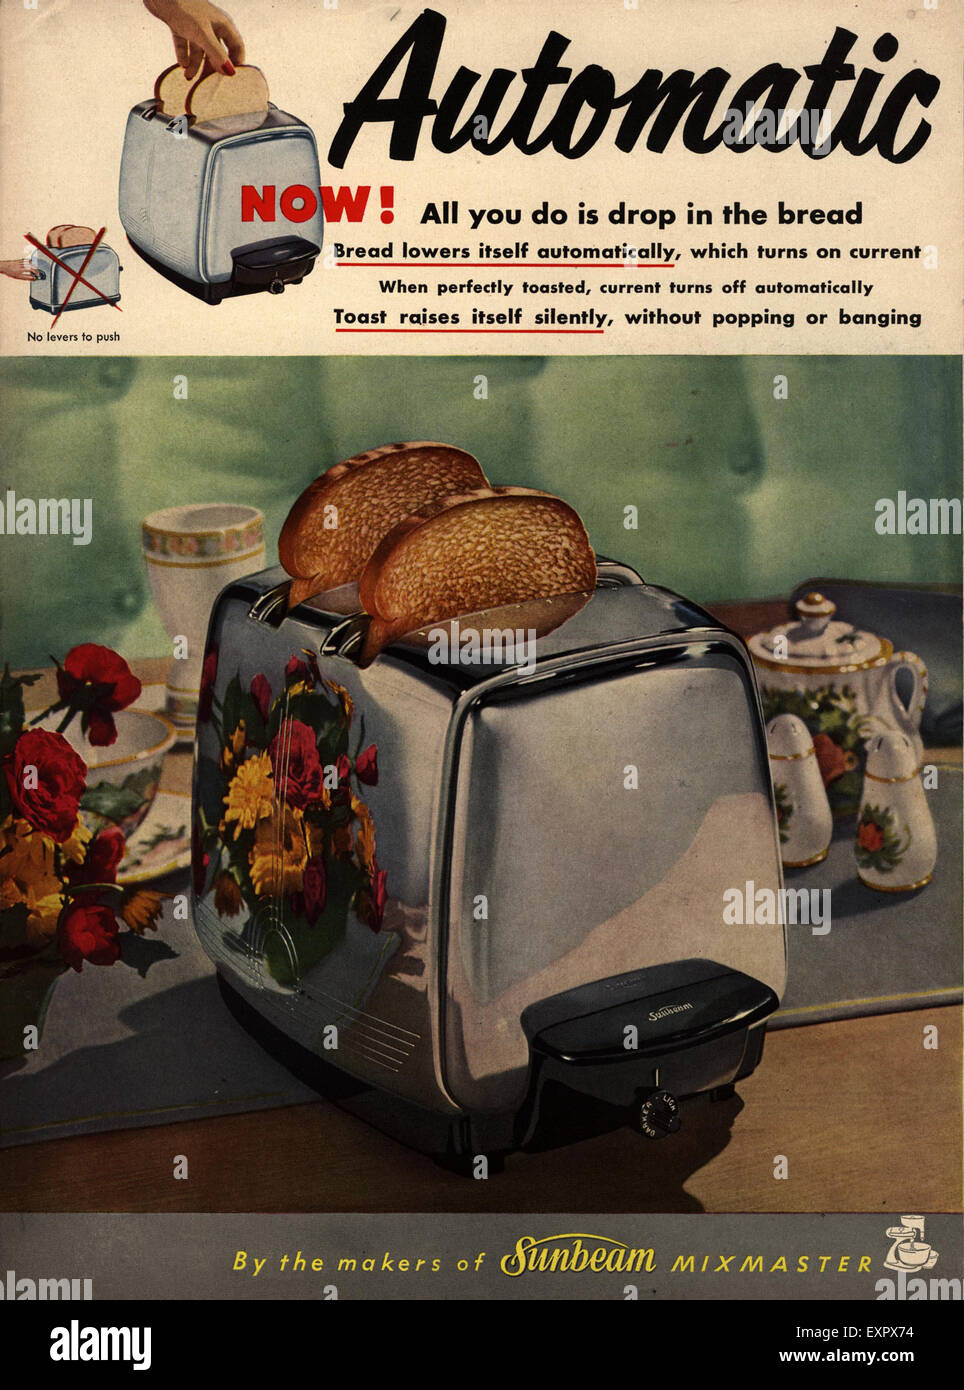 Advertisement for Sunbeam Mixmaster] - The Portal to Texas History